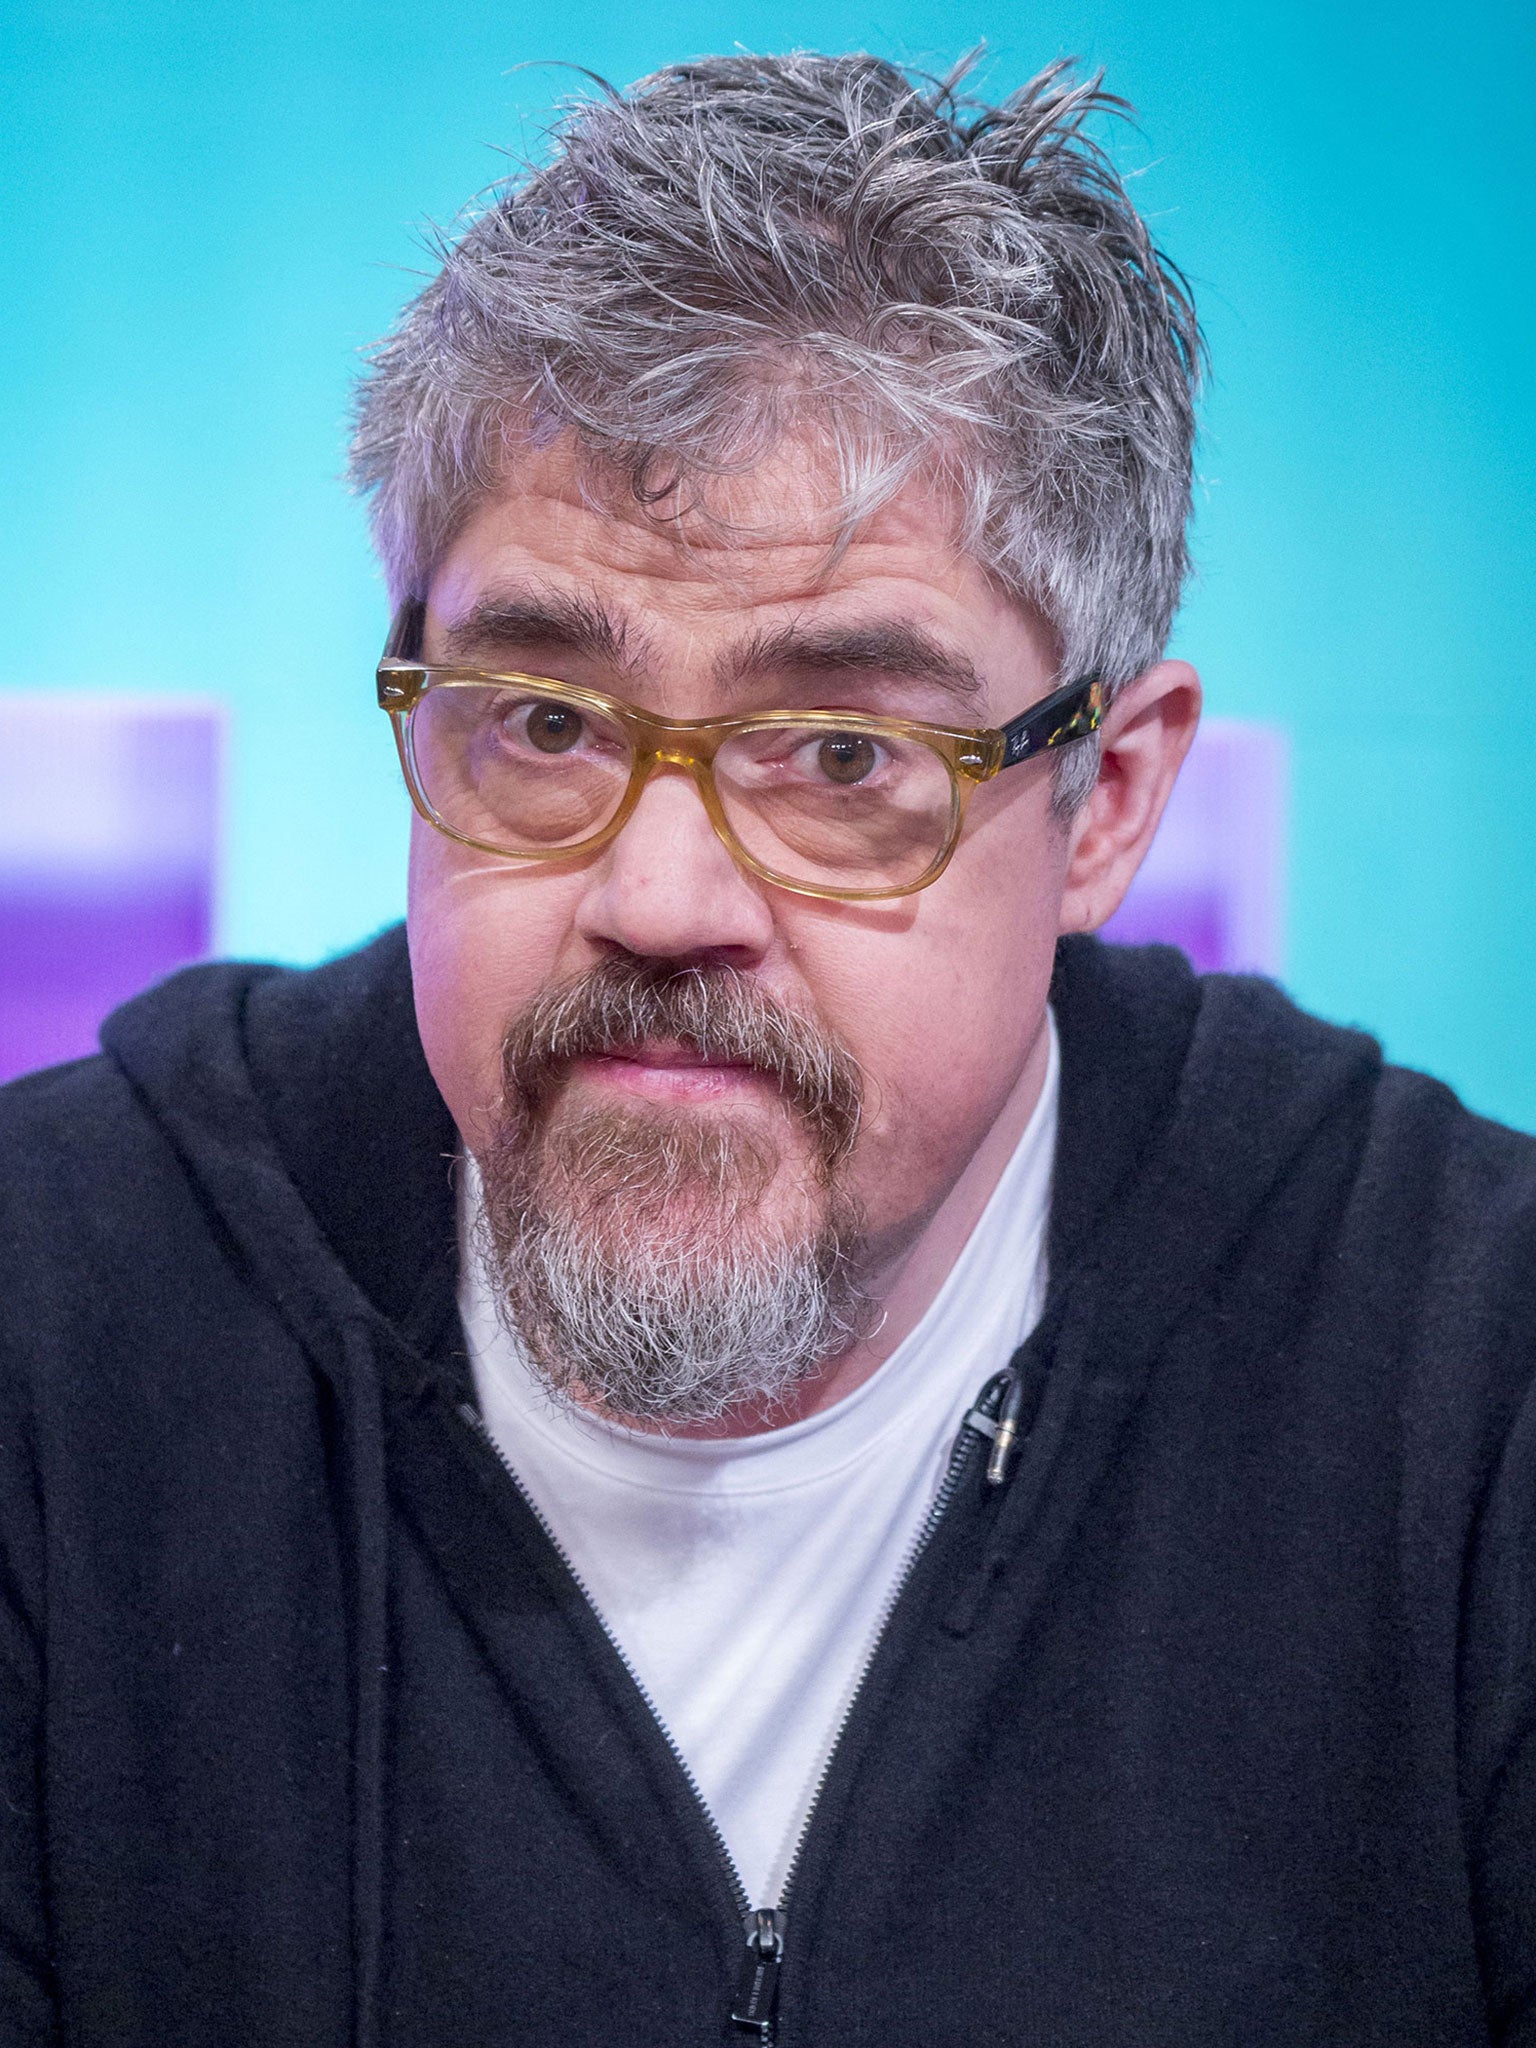 Phill Jupitus is playing Arthur Conan Doyle at the Fringe in a drama called ‘Impossible’